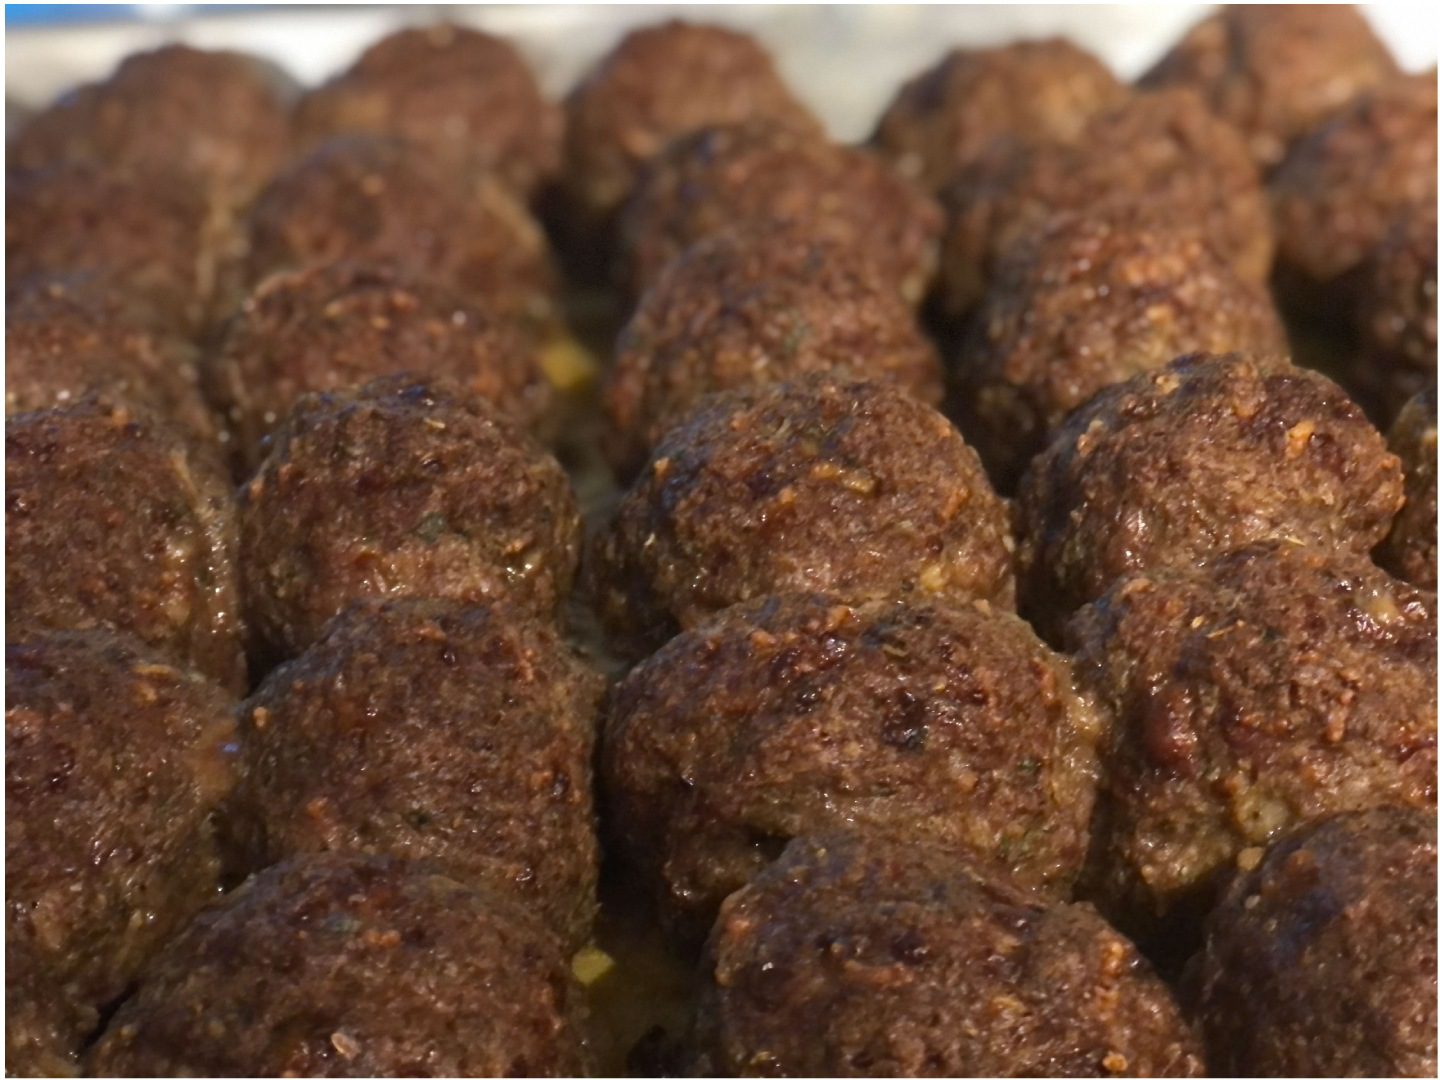 A close up of many meatballs in the pan